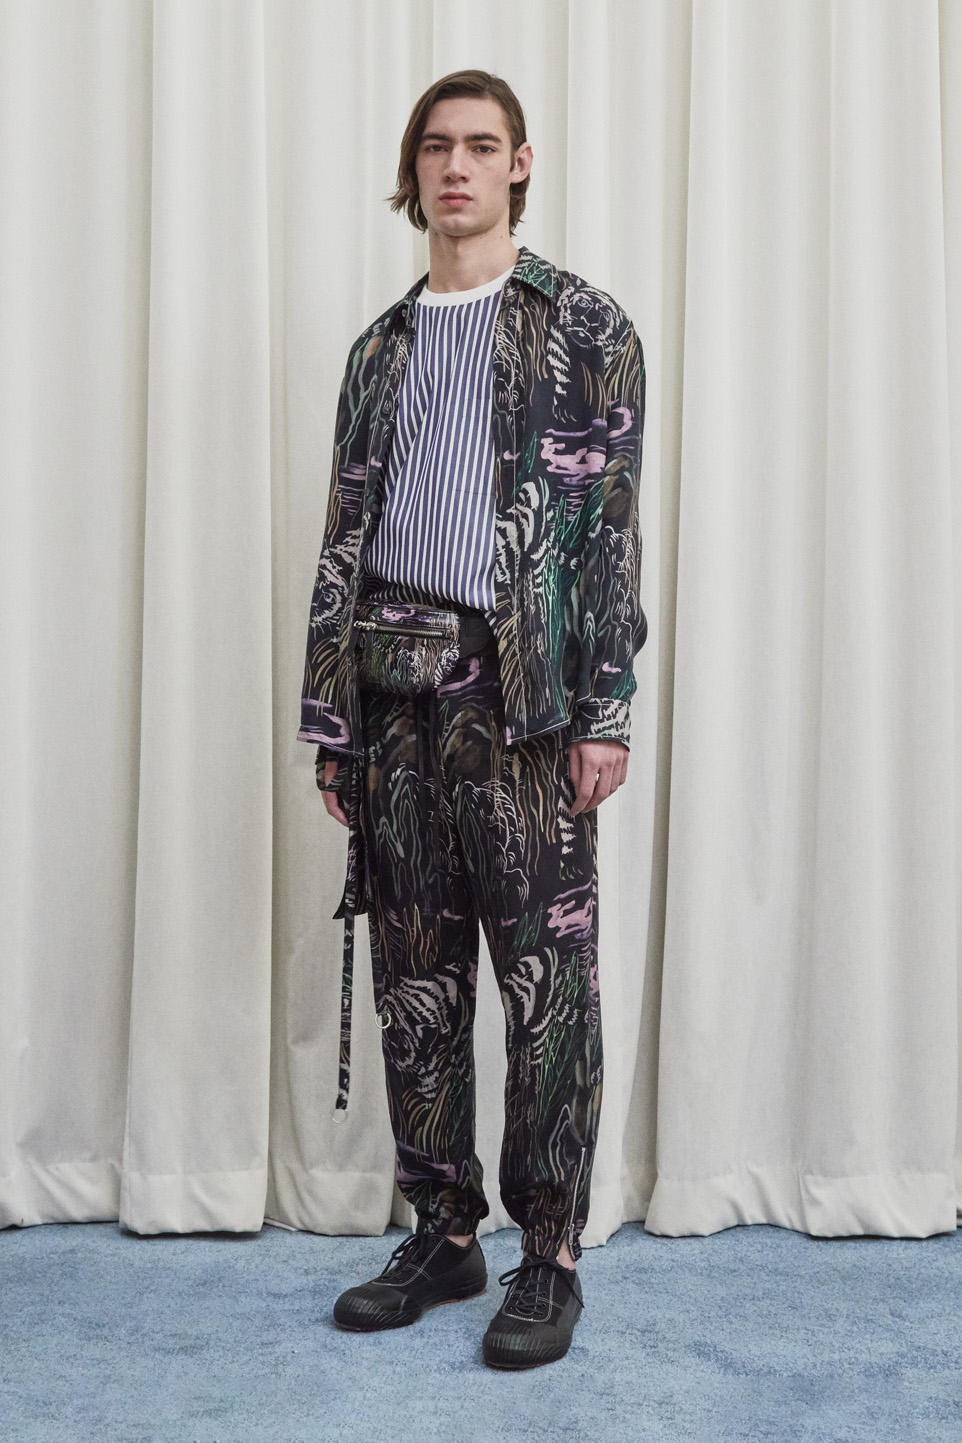 Plim FW19 Mens Collections Lores 25 3.1 phillip lim fall 2019